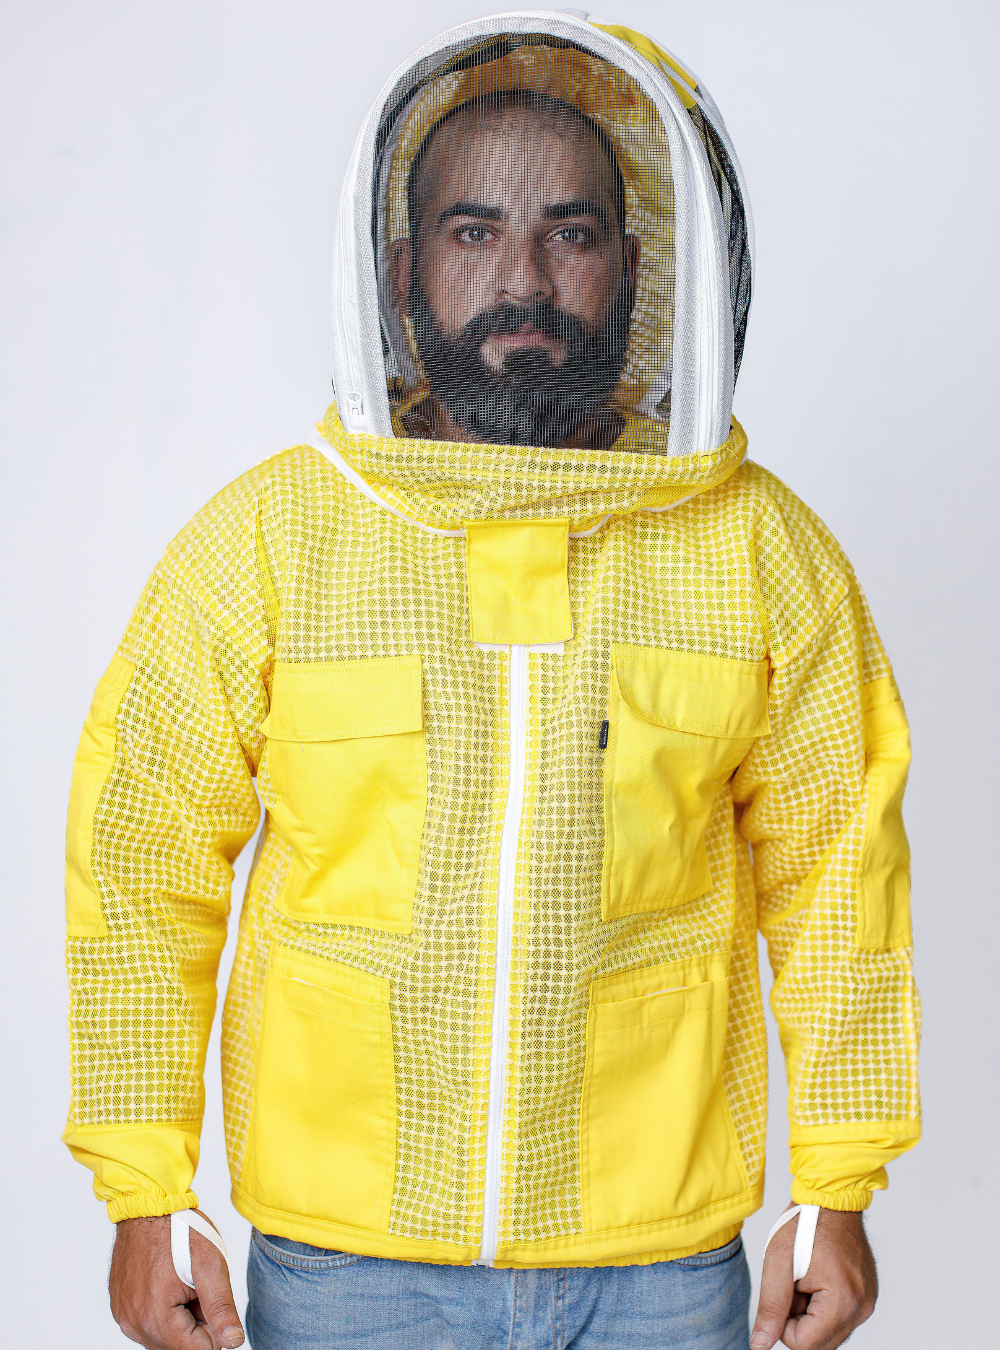 Man wearing Golden Hive Guardian Beekeeping Jacket' for beekeeping, complete with a mesh hood and ample storage pockets